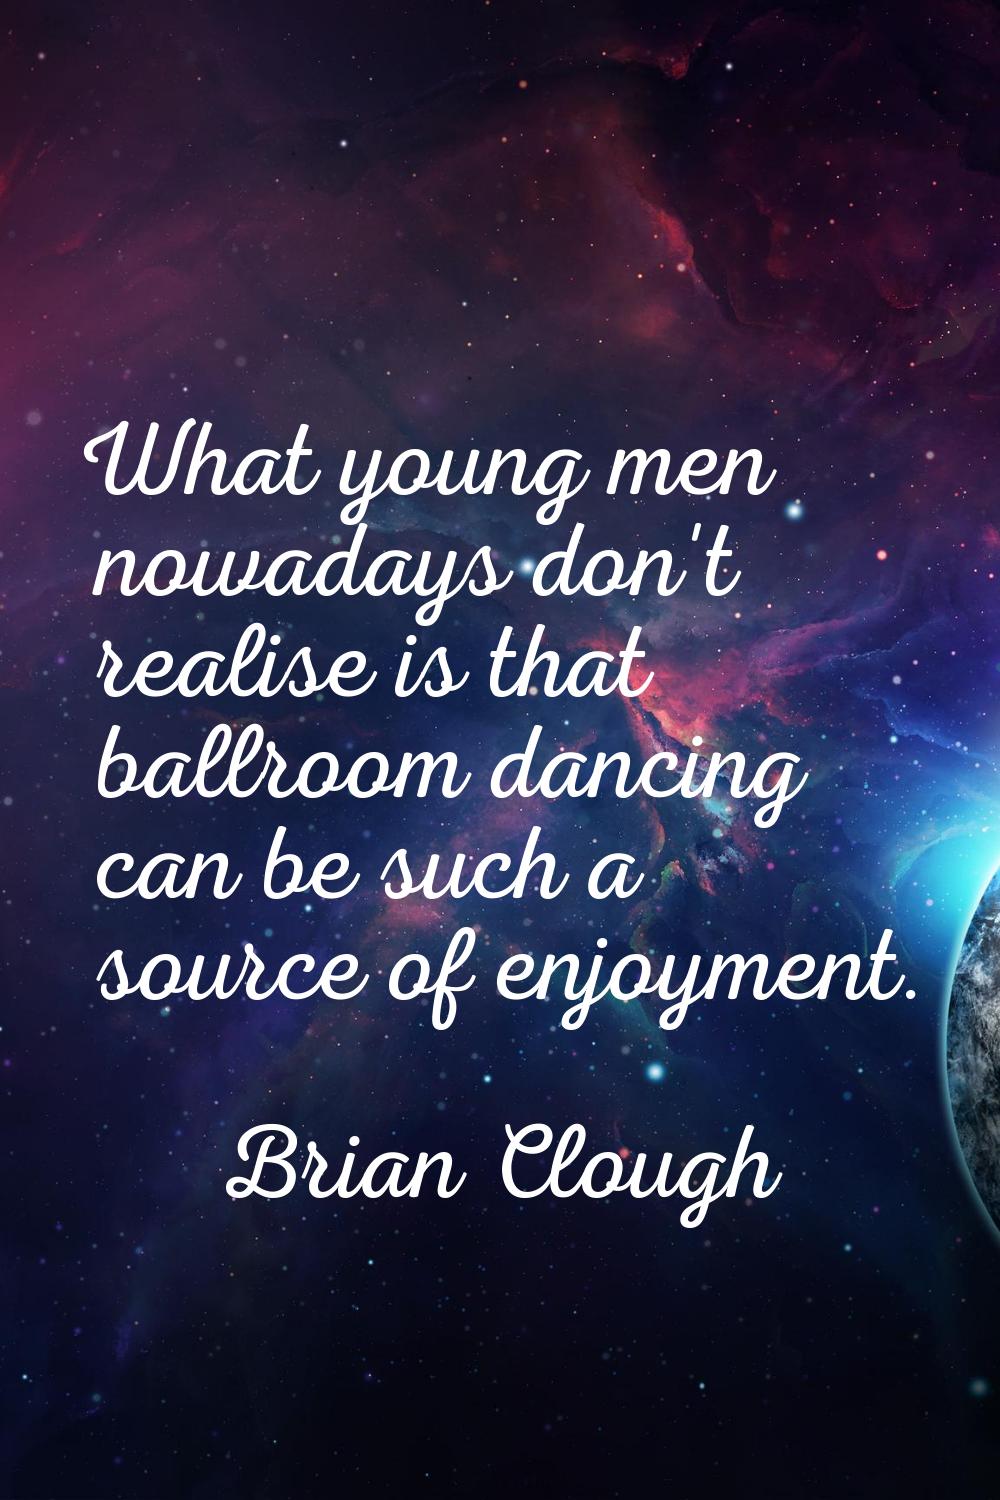 What young men nowadays don't realise is that ballroom dancing can be such a source of enjoyment.